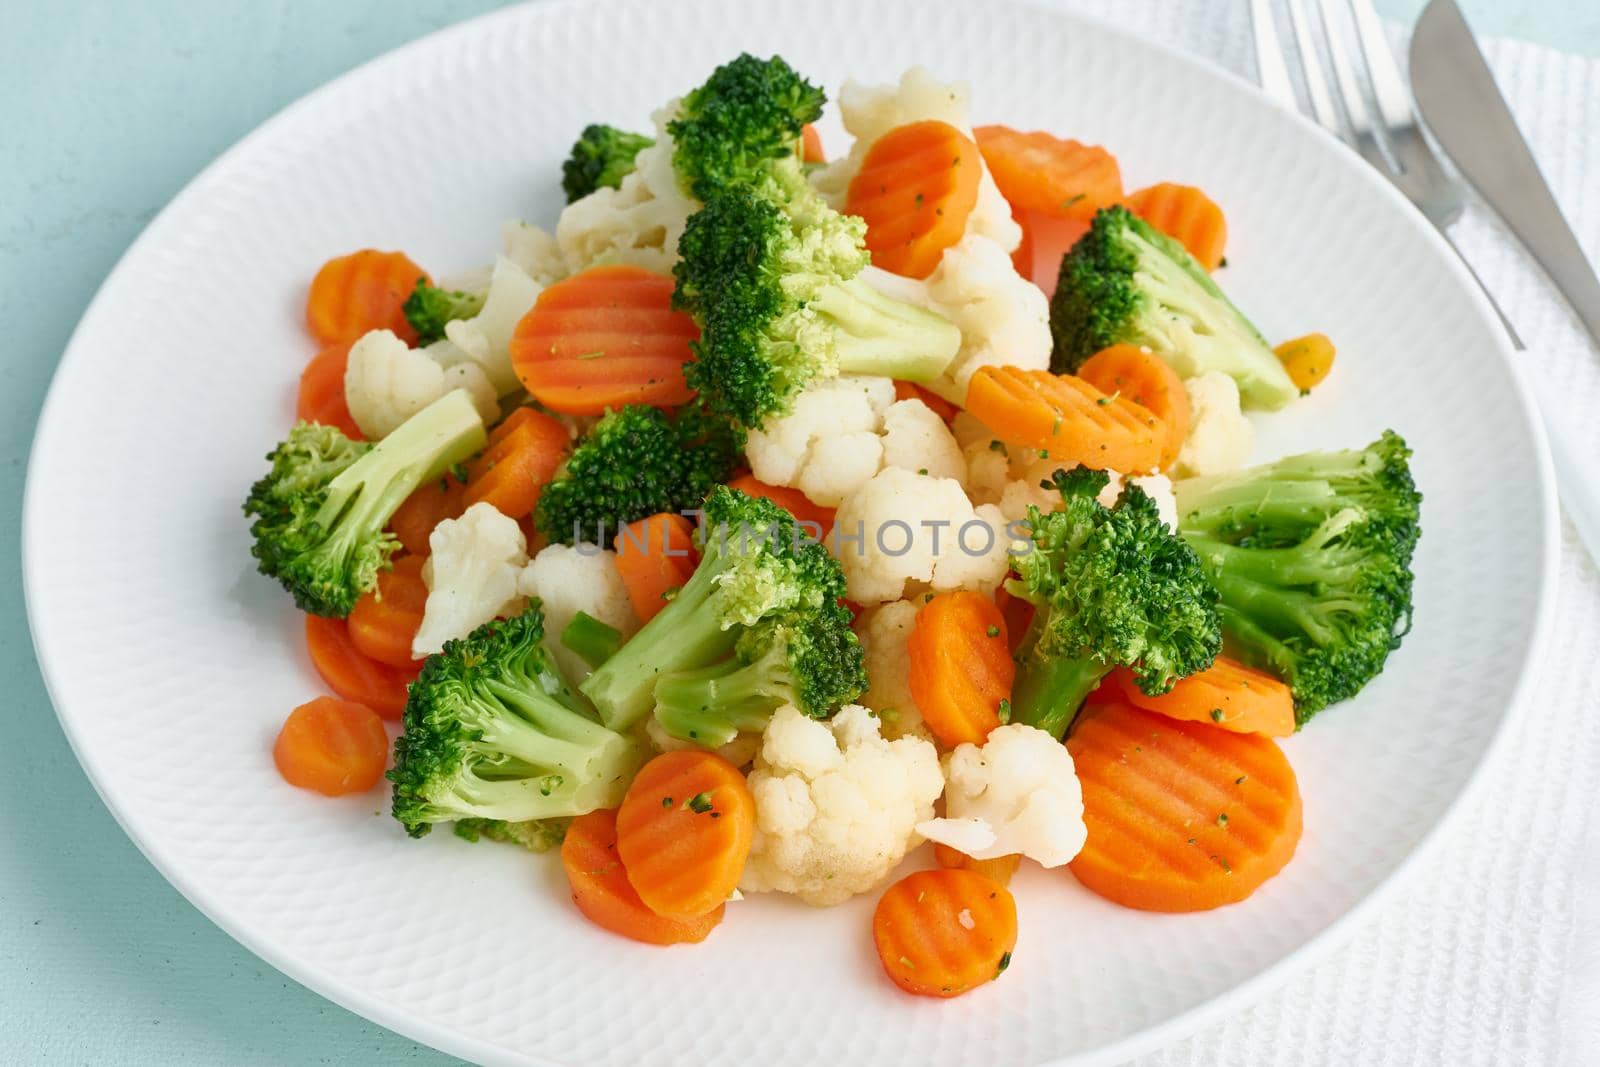 Mix of boiled vegetables. Broccoli, carrots, cauliflower. Steamed vegetables for dietary by NataBene